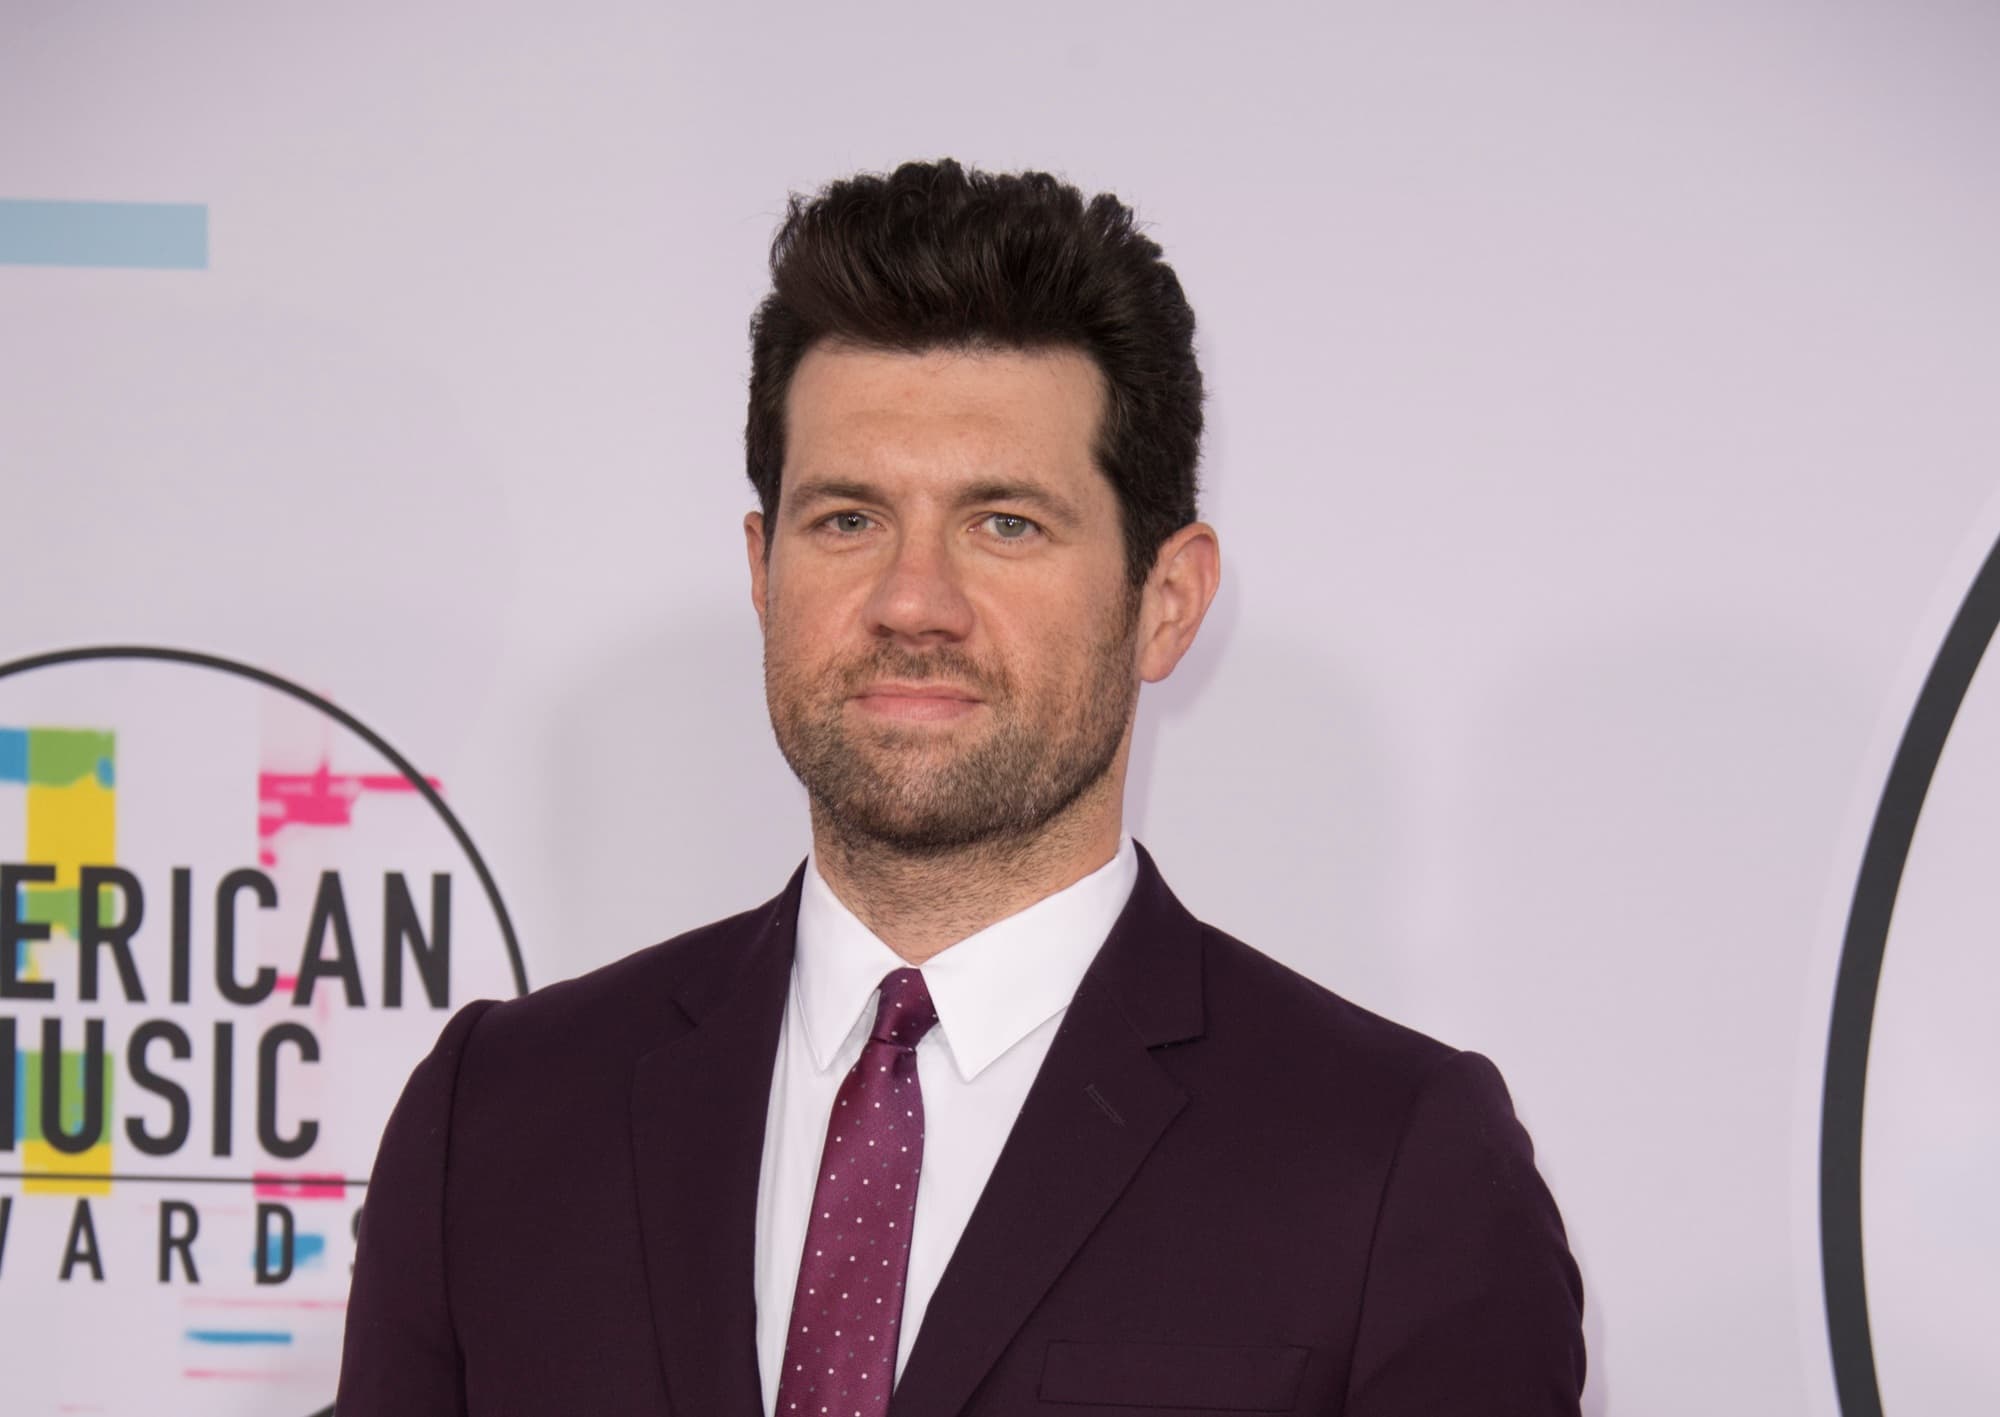 National LGBTQ Task Force to honor Billy Eichner at its Miami Beach gala